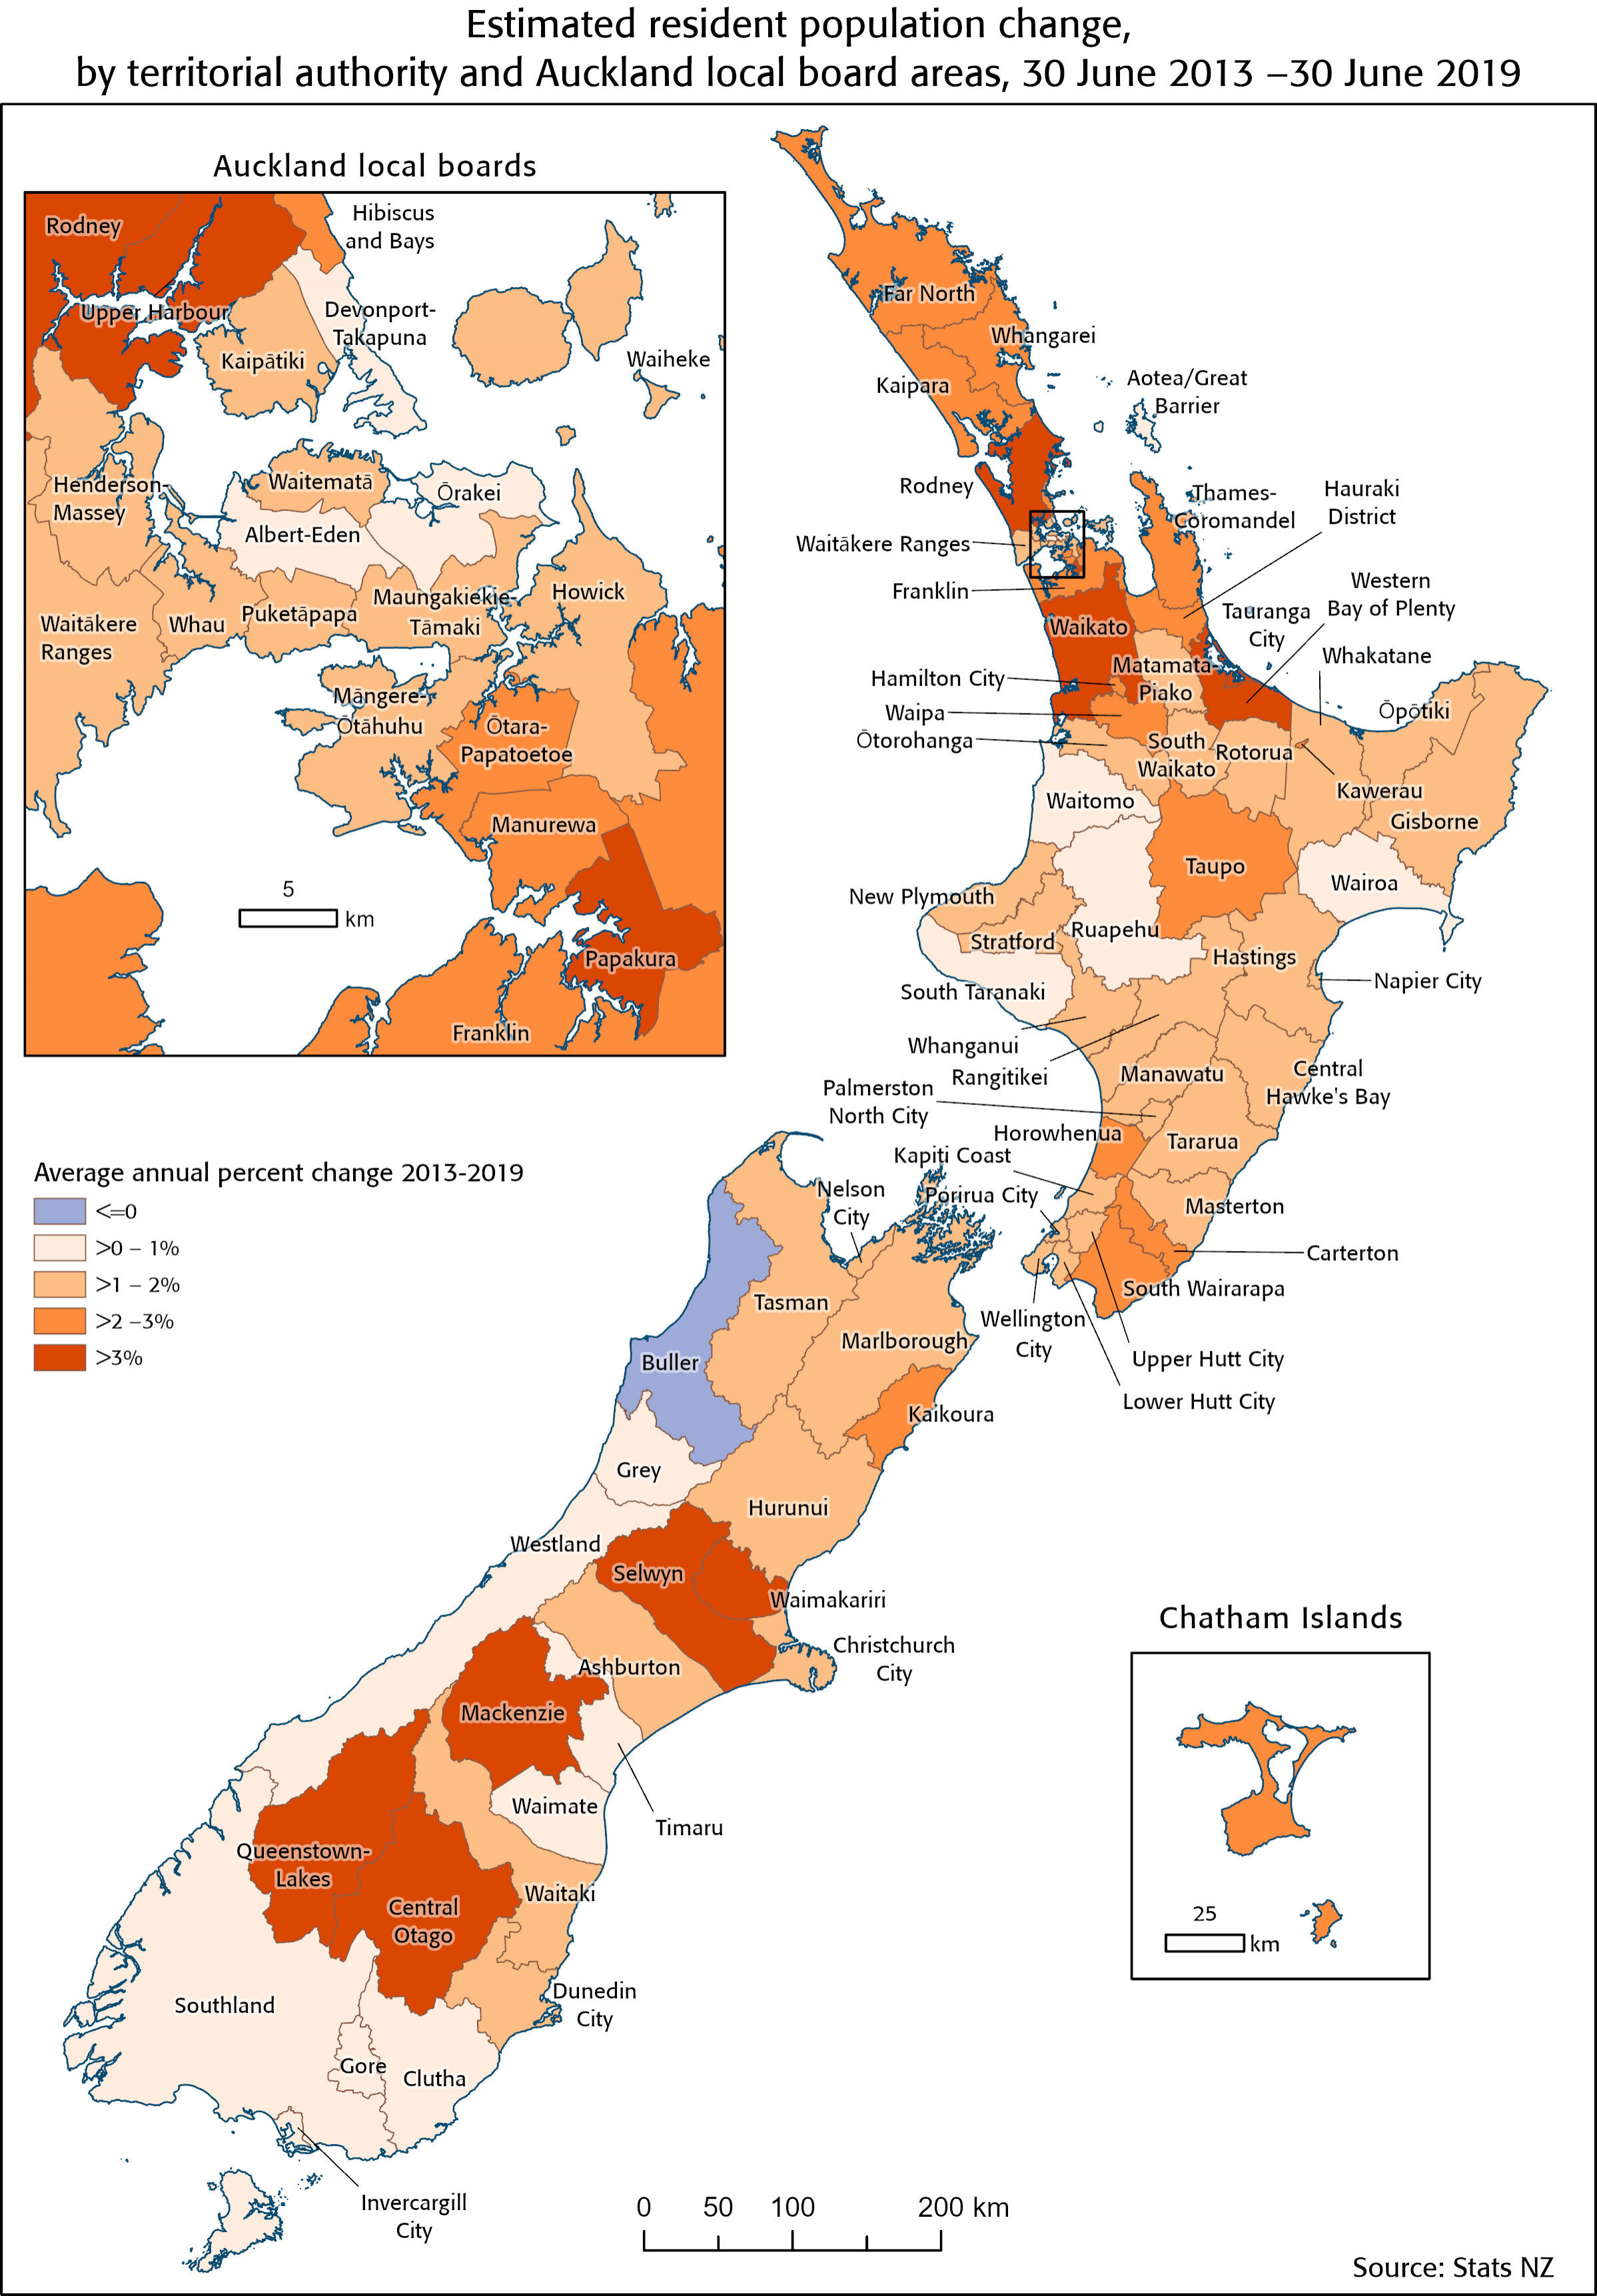 Map showing estimated resident population change, by territorial authority and Auckland local board areas, 30 Jun 2013 - 30 June 2019. Text alternative available below map.